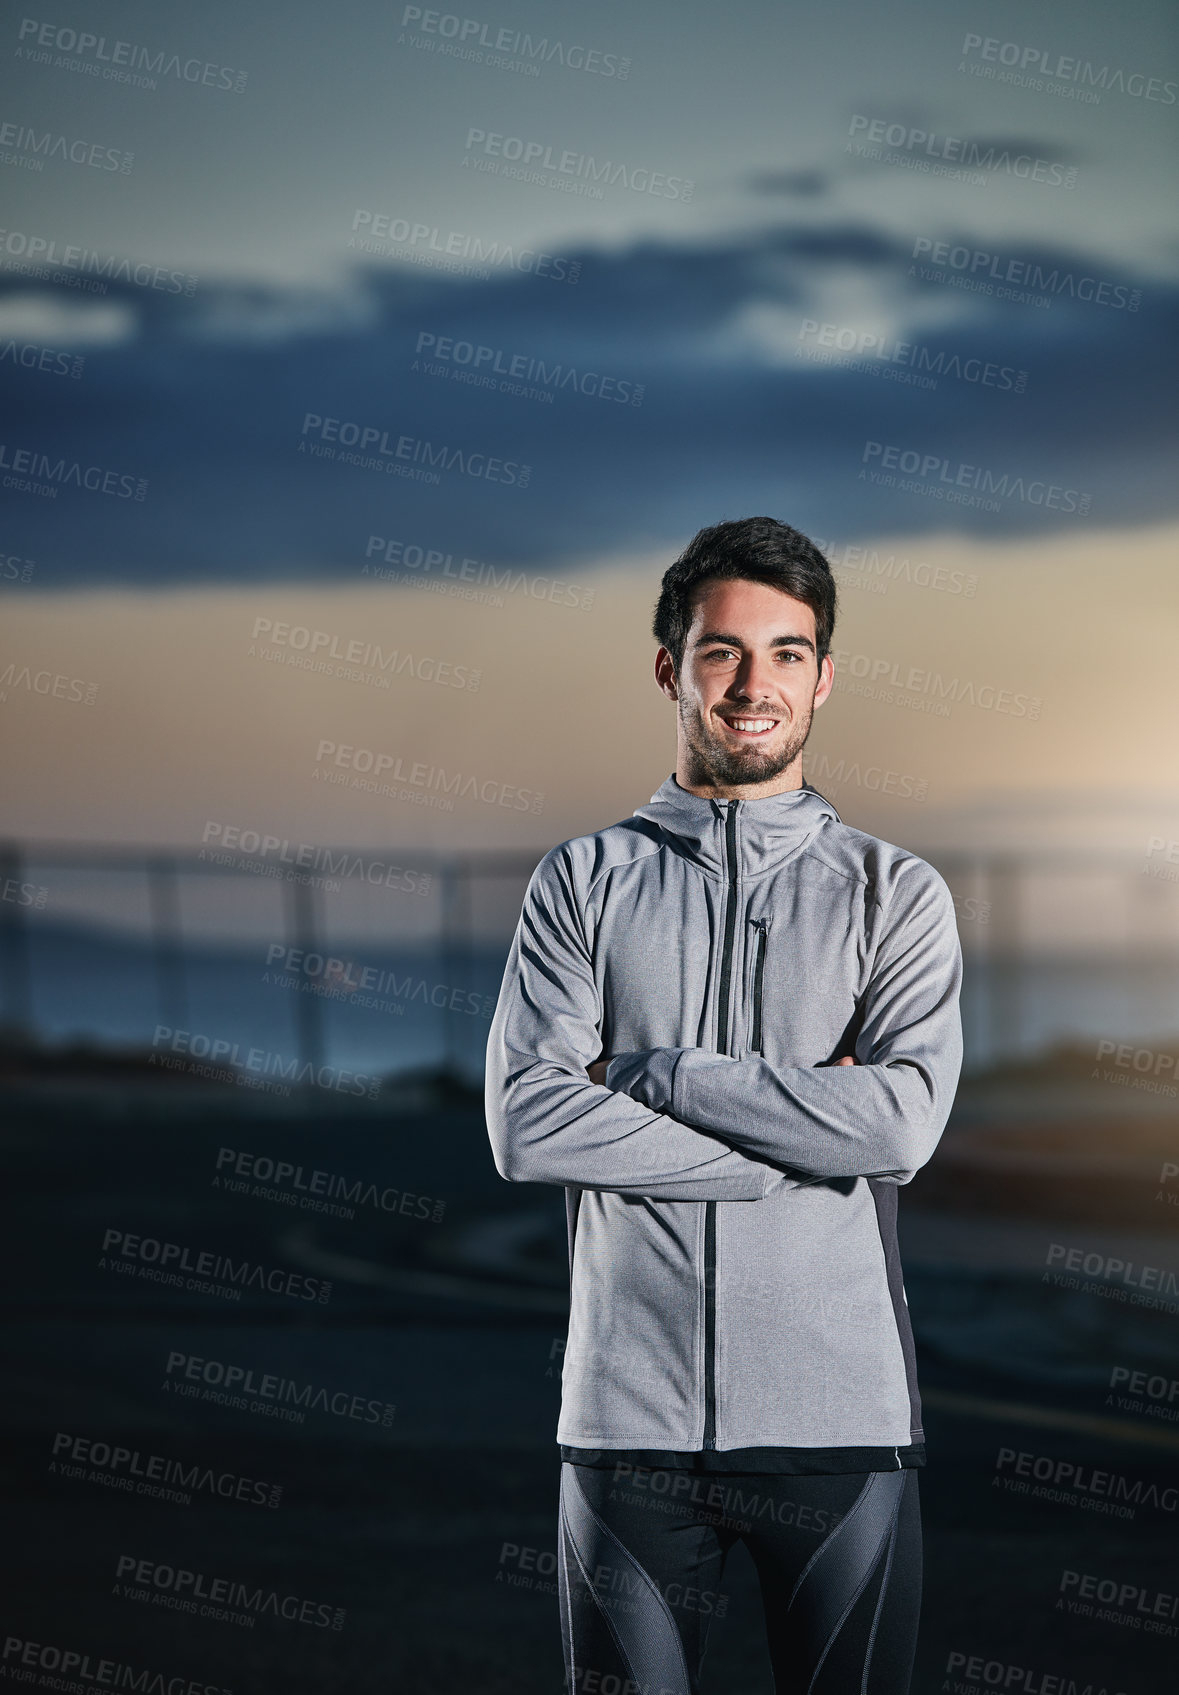 Buy stock photo Shot of a sporty young man out for a run